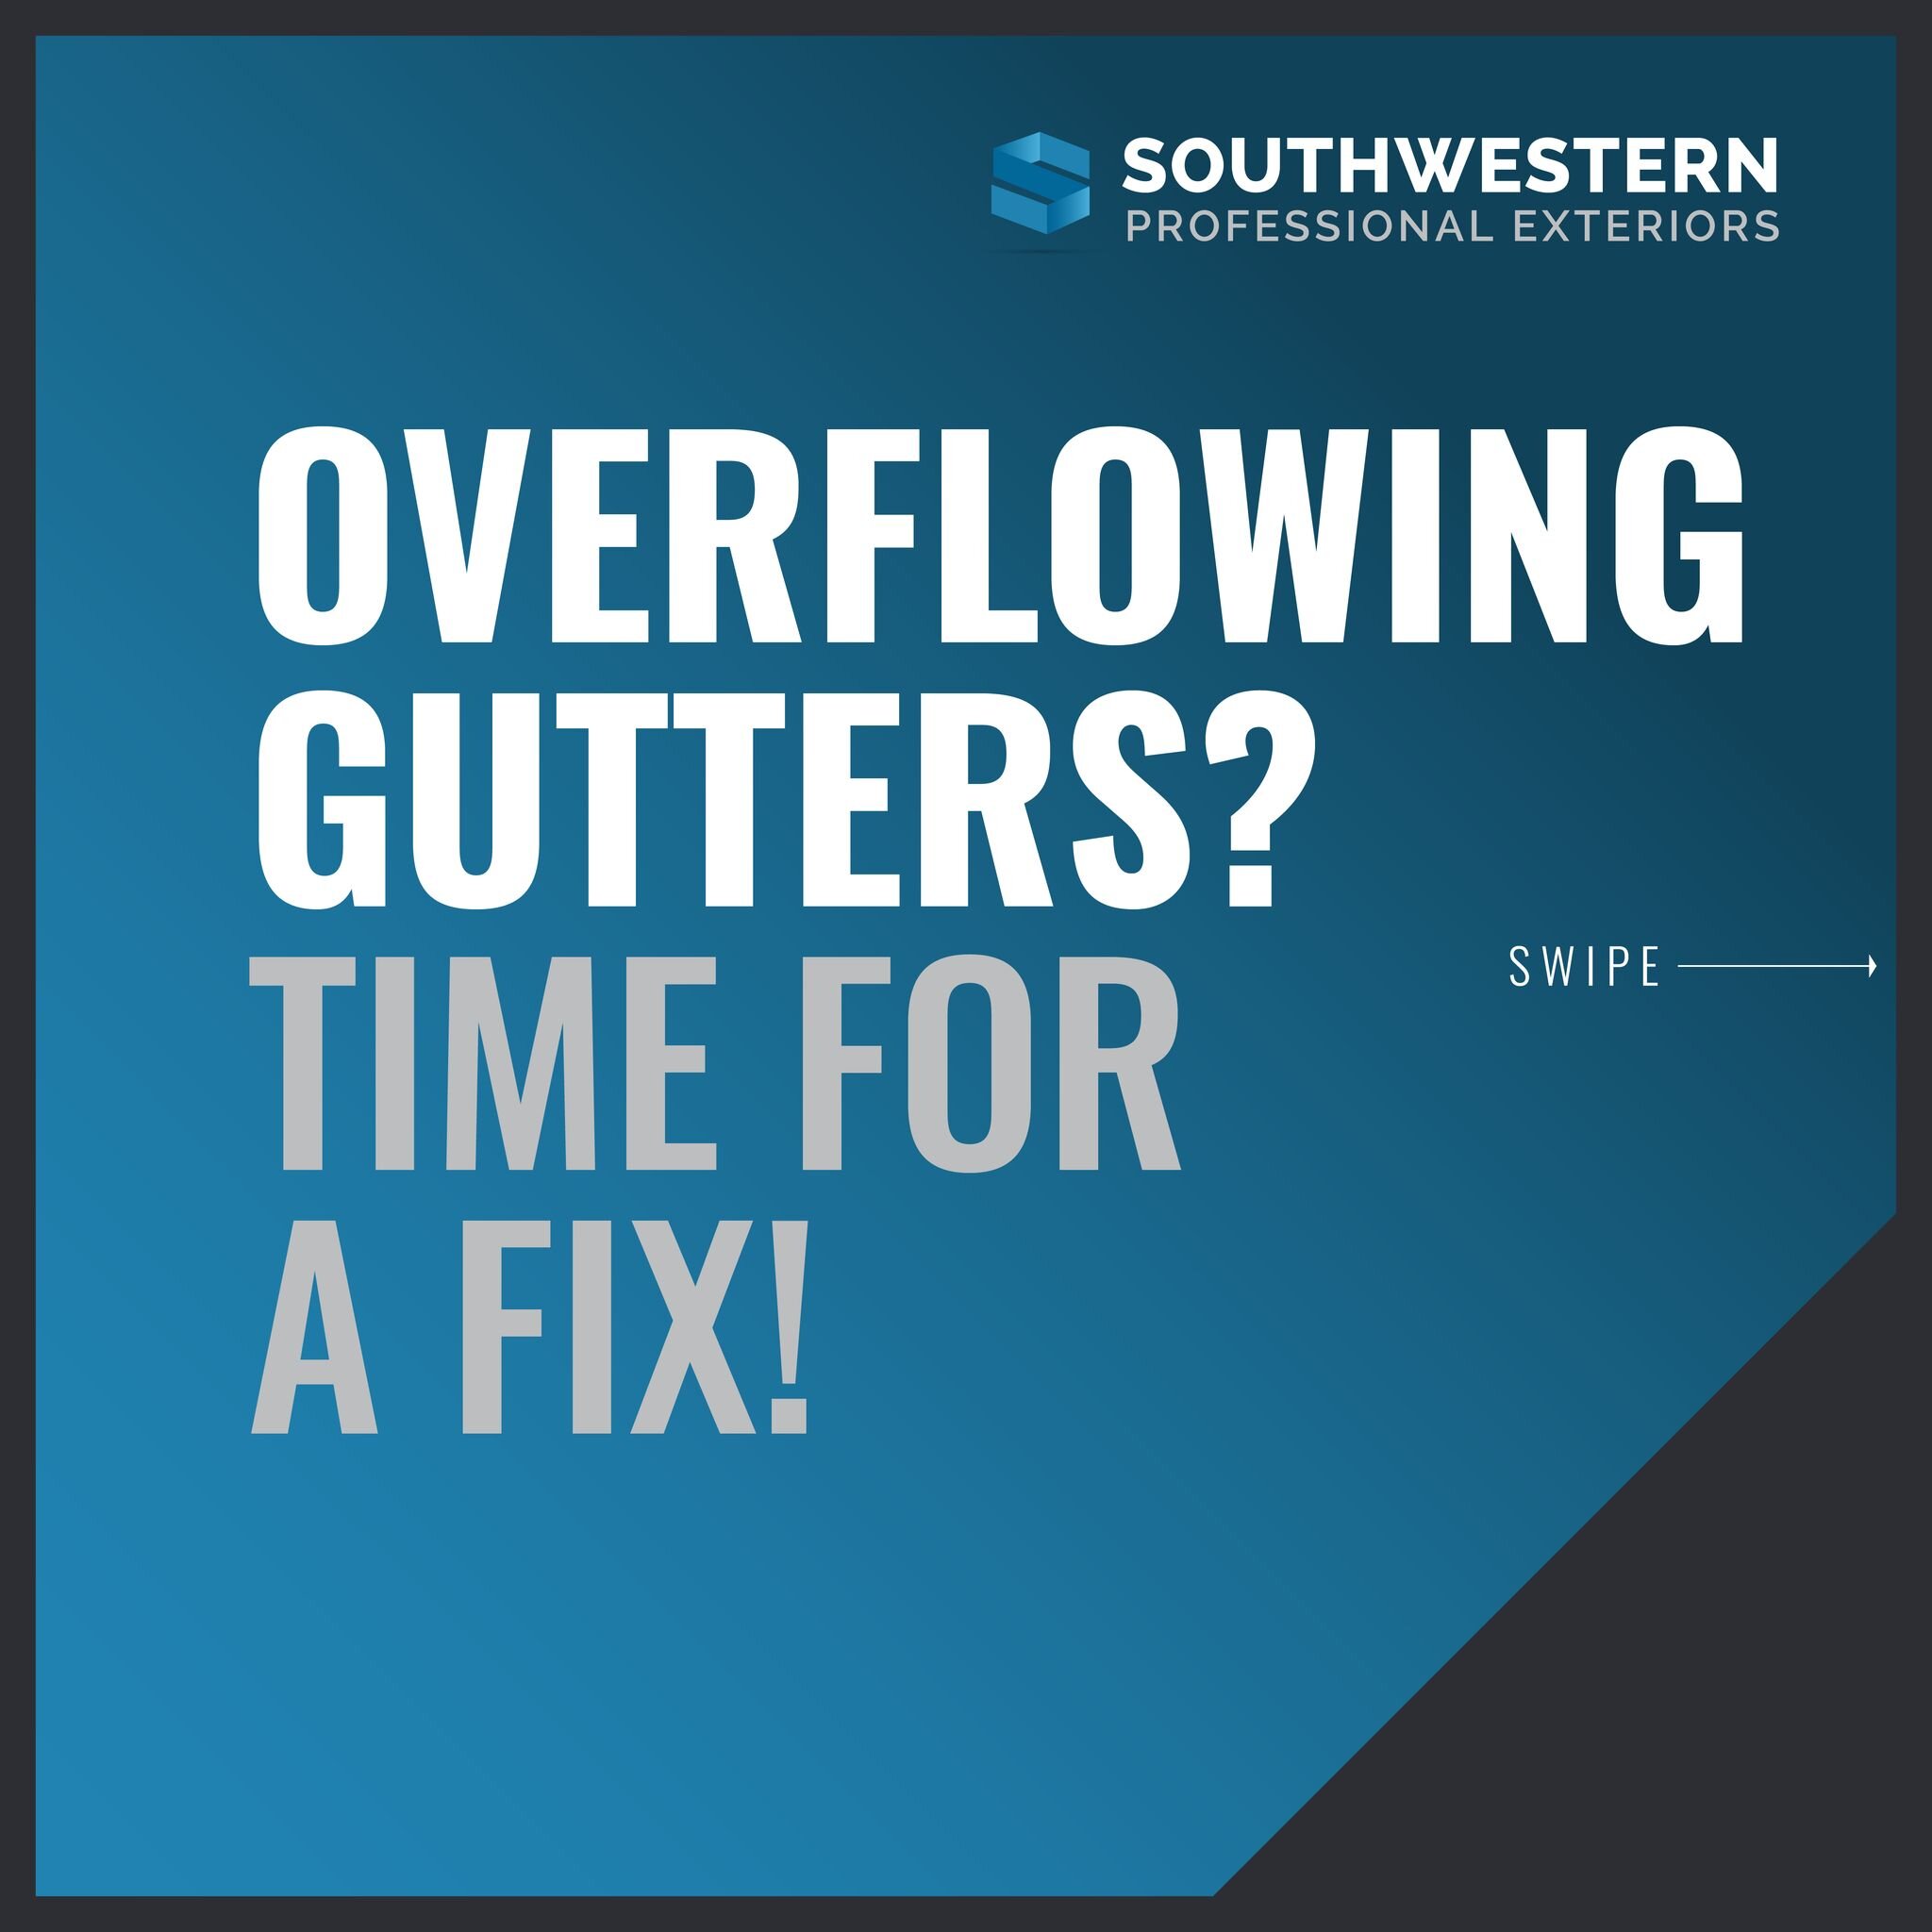 🏡 Don't let overflowing gutters rain on your parade! 🌧️ It's time for a fix! 💪 
-
Our expert team at Southwestern Exteriors is here to help you with all your gutter woes. From installation to repairs, we've got you covered! 
-
Get started with a f